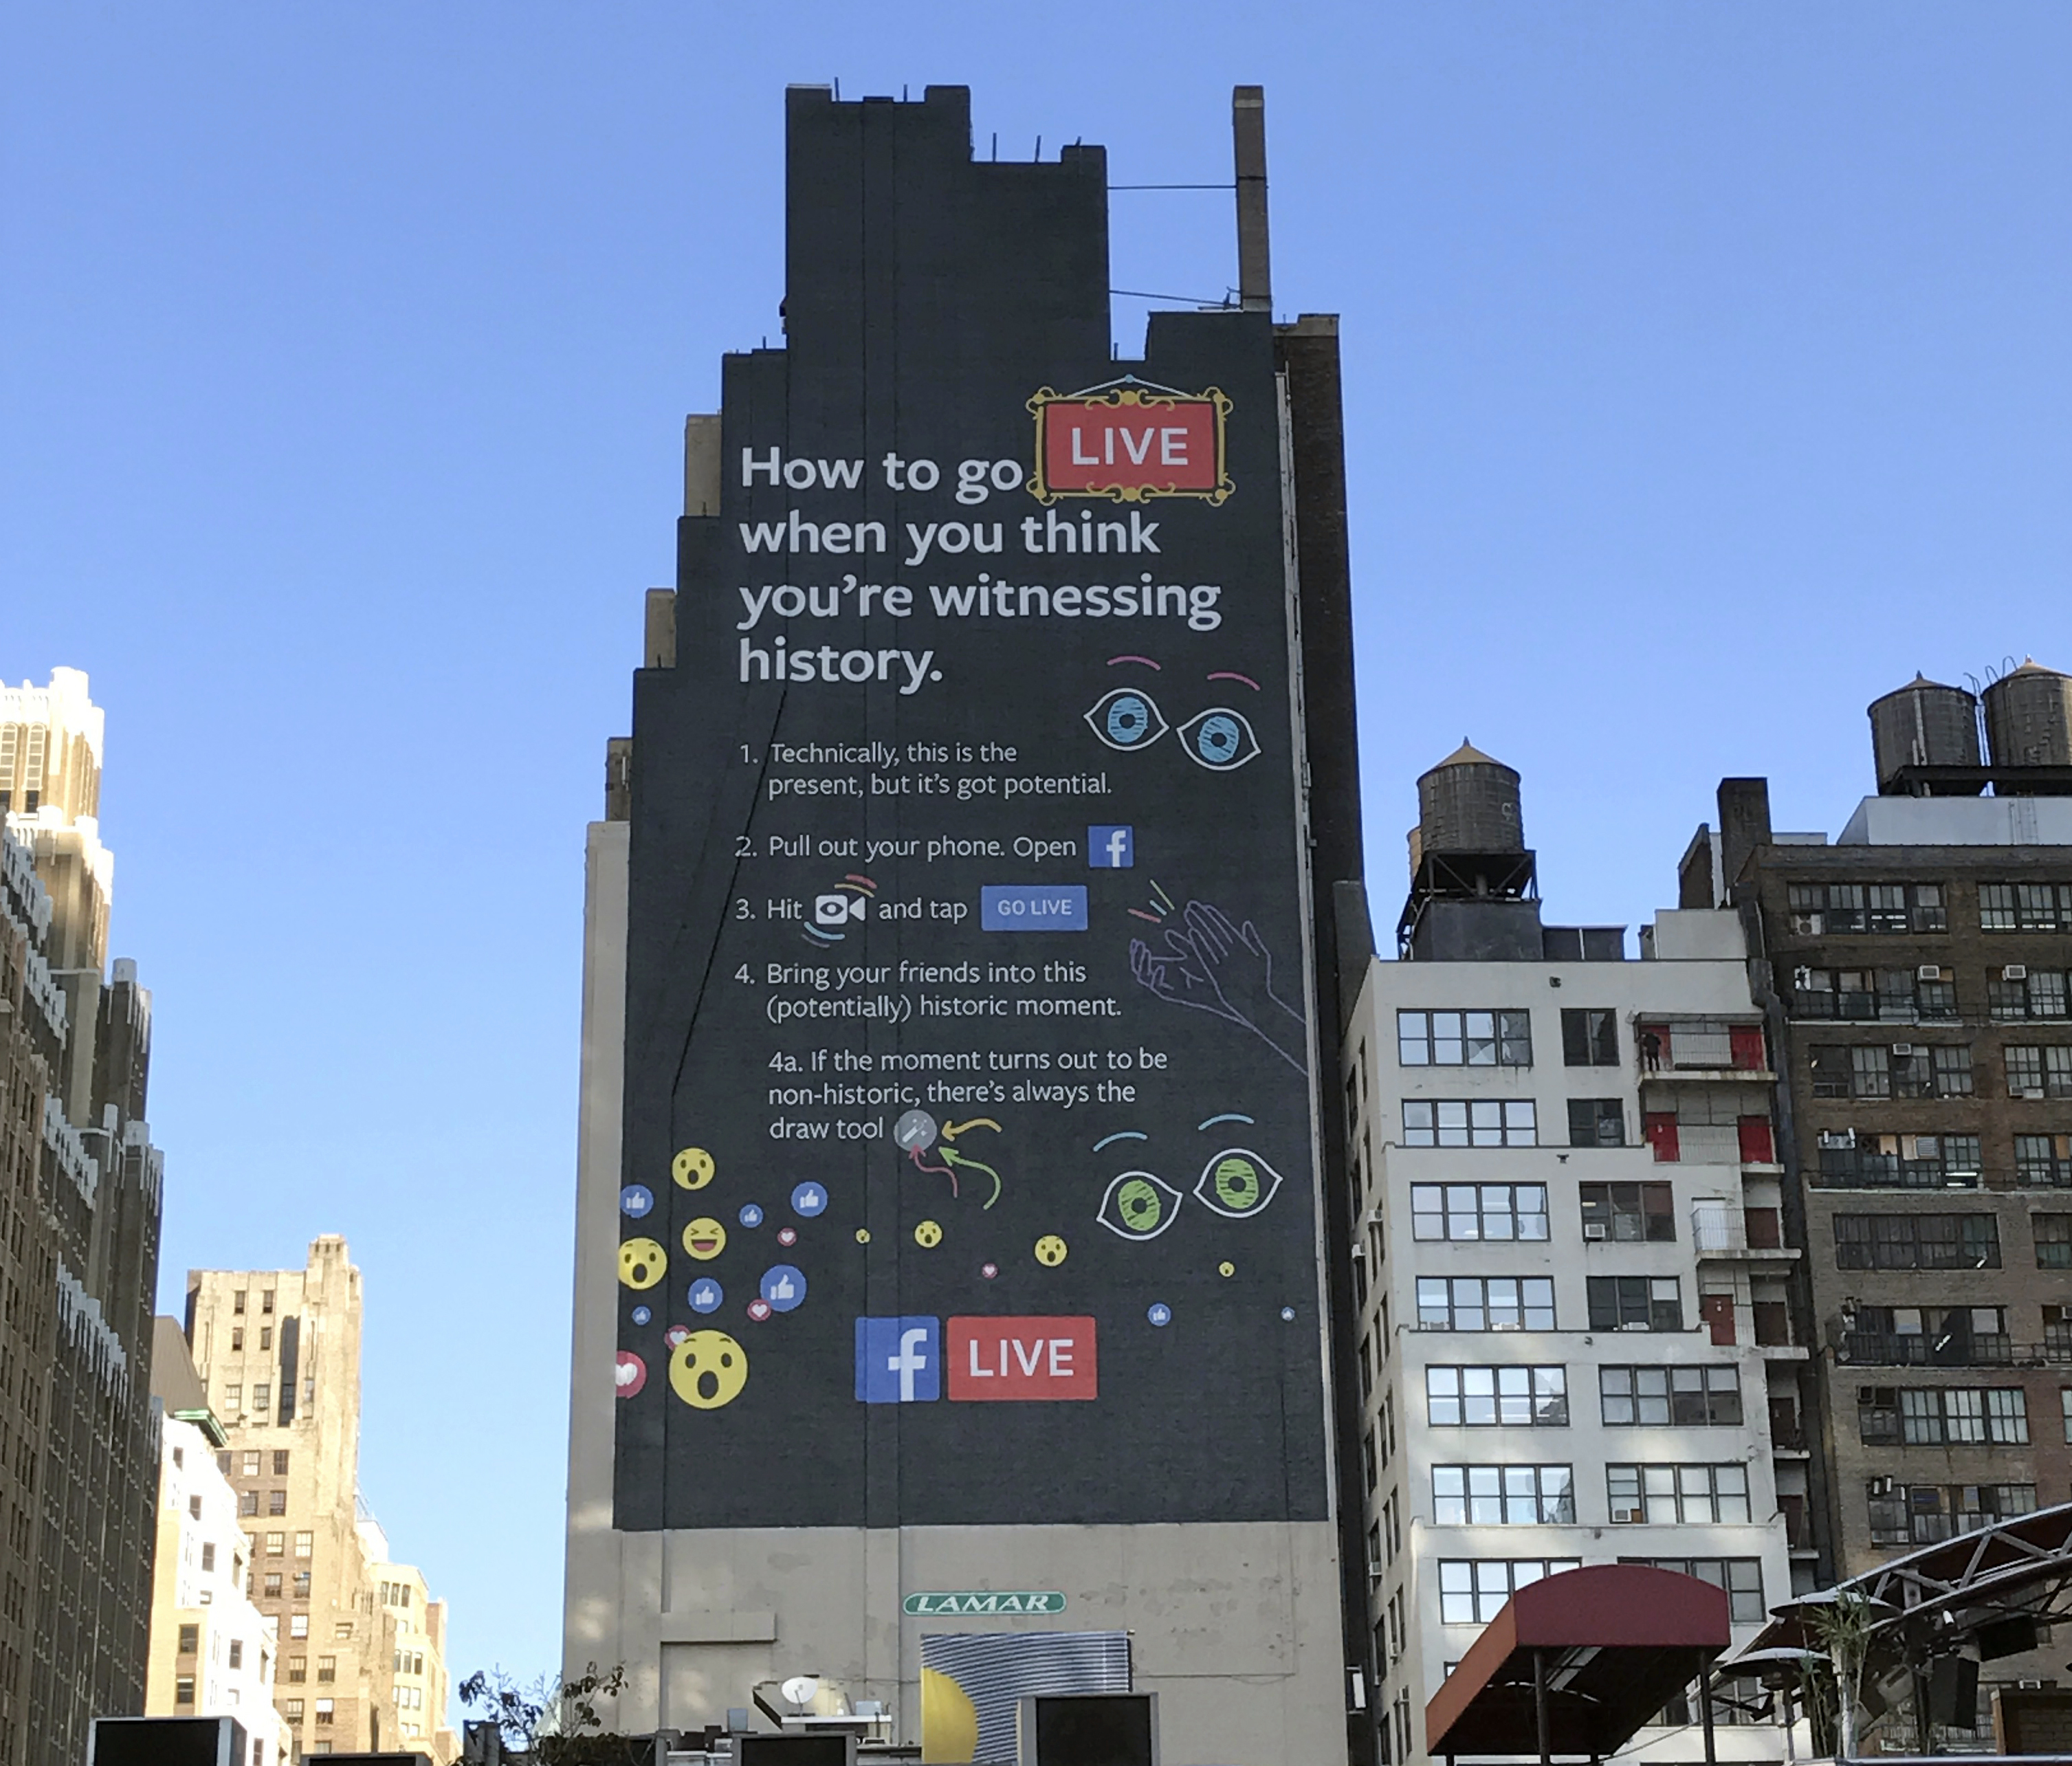 This Nov. 16, 2016, photo shows a Facebook Live billboard on the side of a building near New York's Penn Station. From billboards to TV ads to endless notifications, Facebook is furiously promoting its live video feature as it tries to get more users to shoot and watch such videos. (AP Photo/Anick Jesdanun)